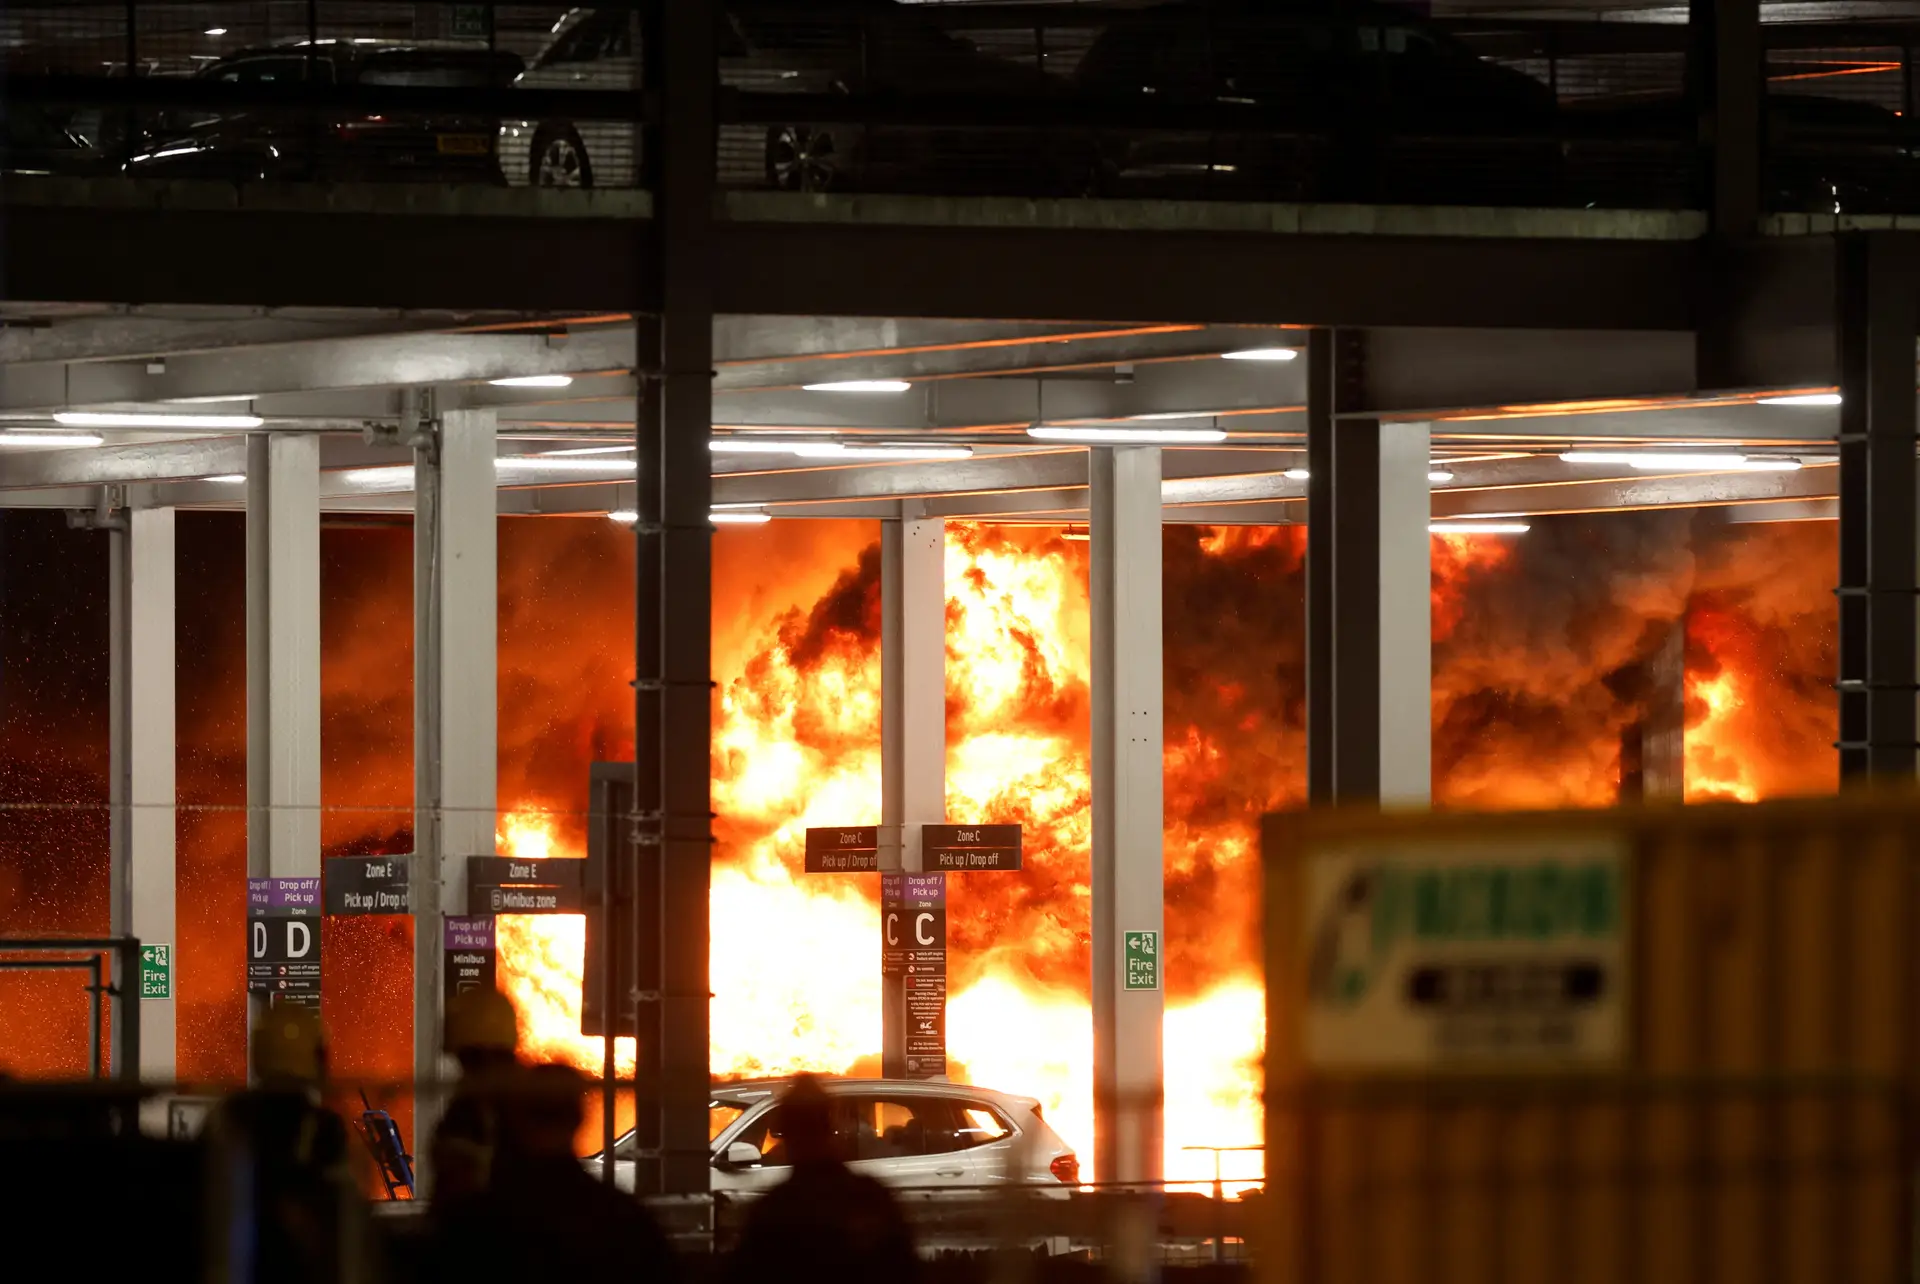 A fire in a car park at Luton Airport in London, England